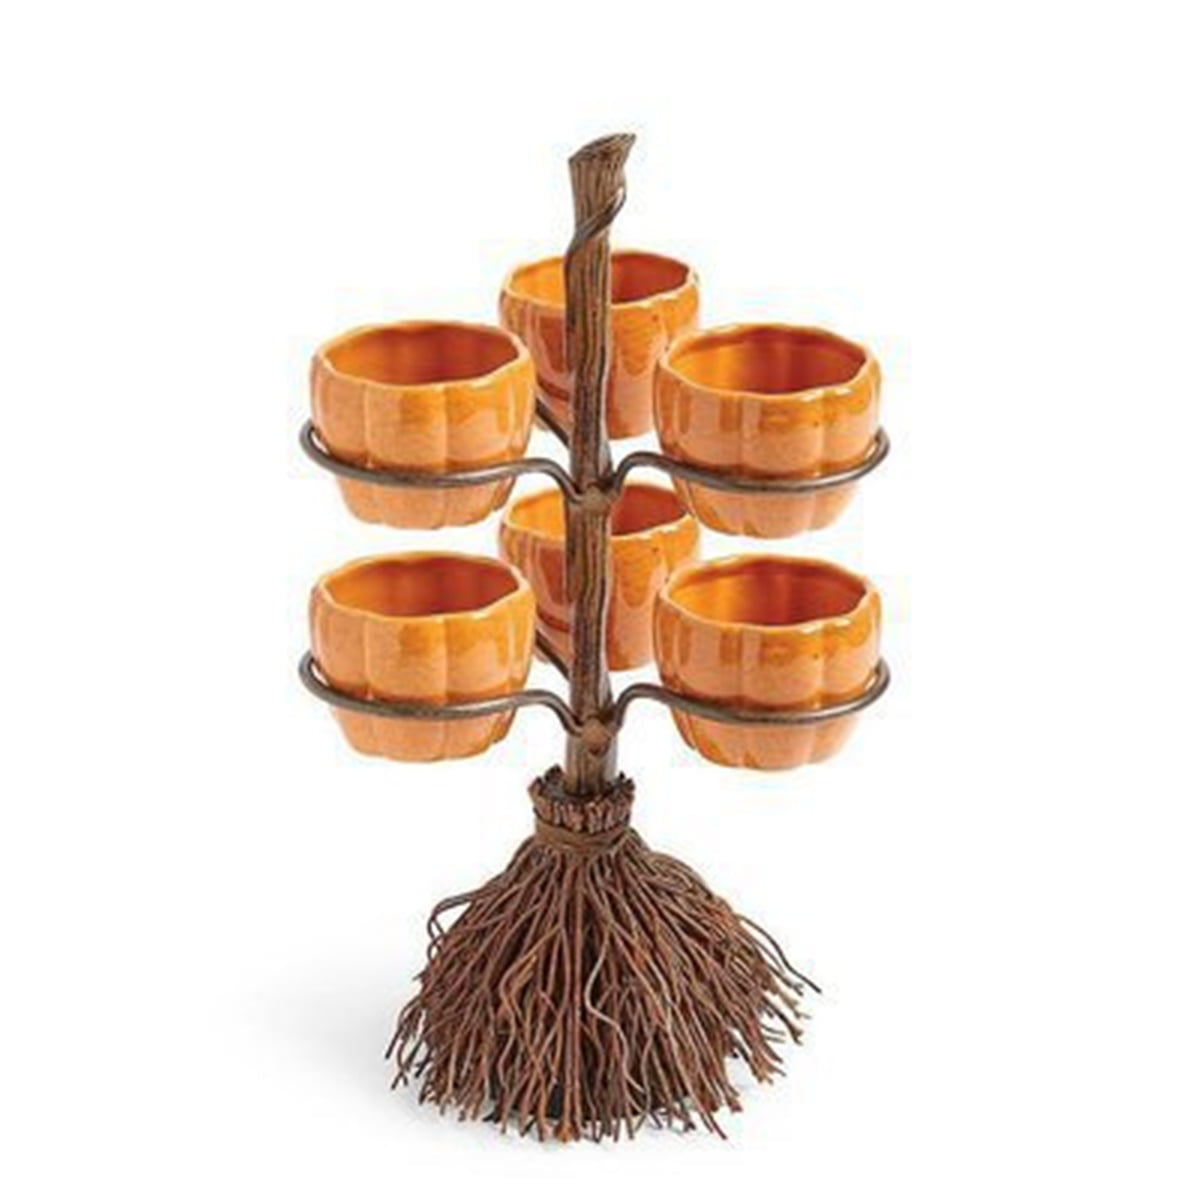 Three-Tier Halloween Pumpkin Snack Bowl Stand Decor Basket Candy Holder Perfect for Serving Snacks Salad Desser Party Favor Supplies Collapsible Trays